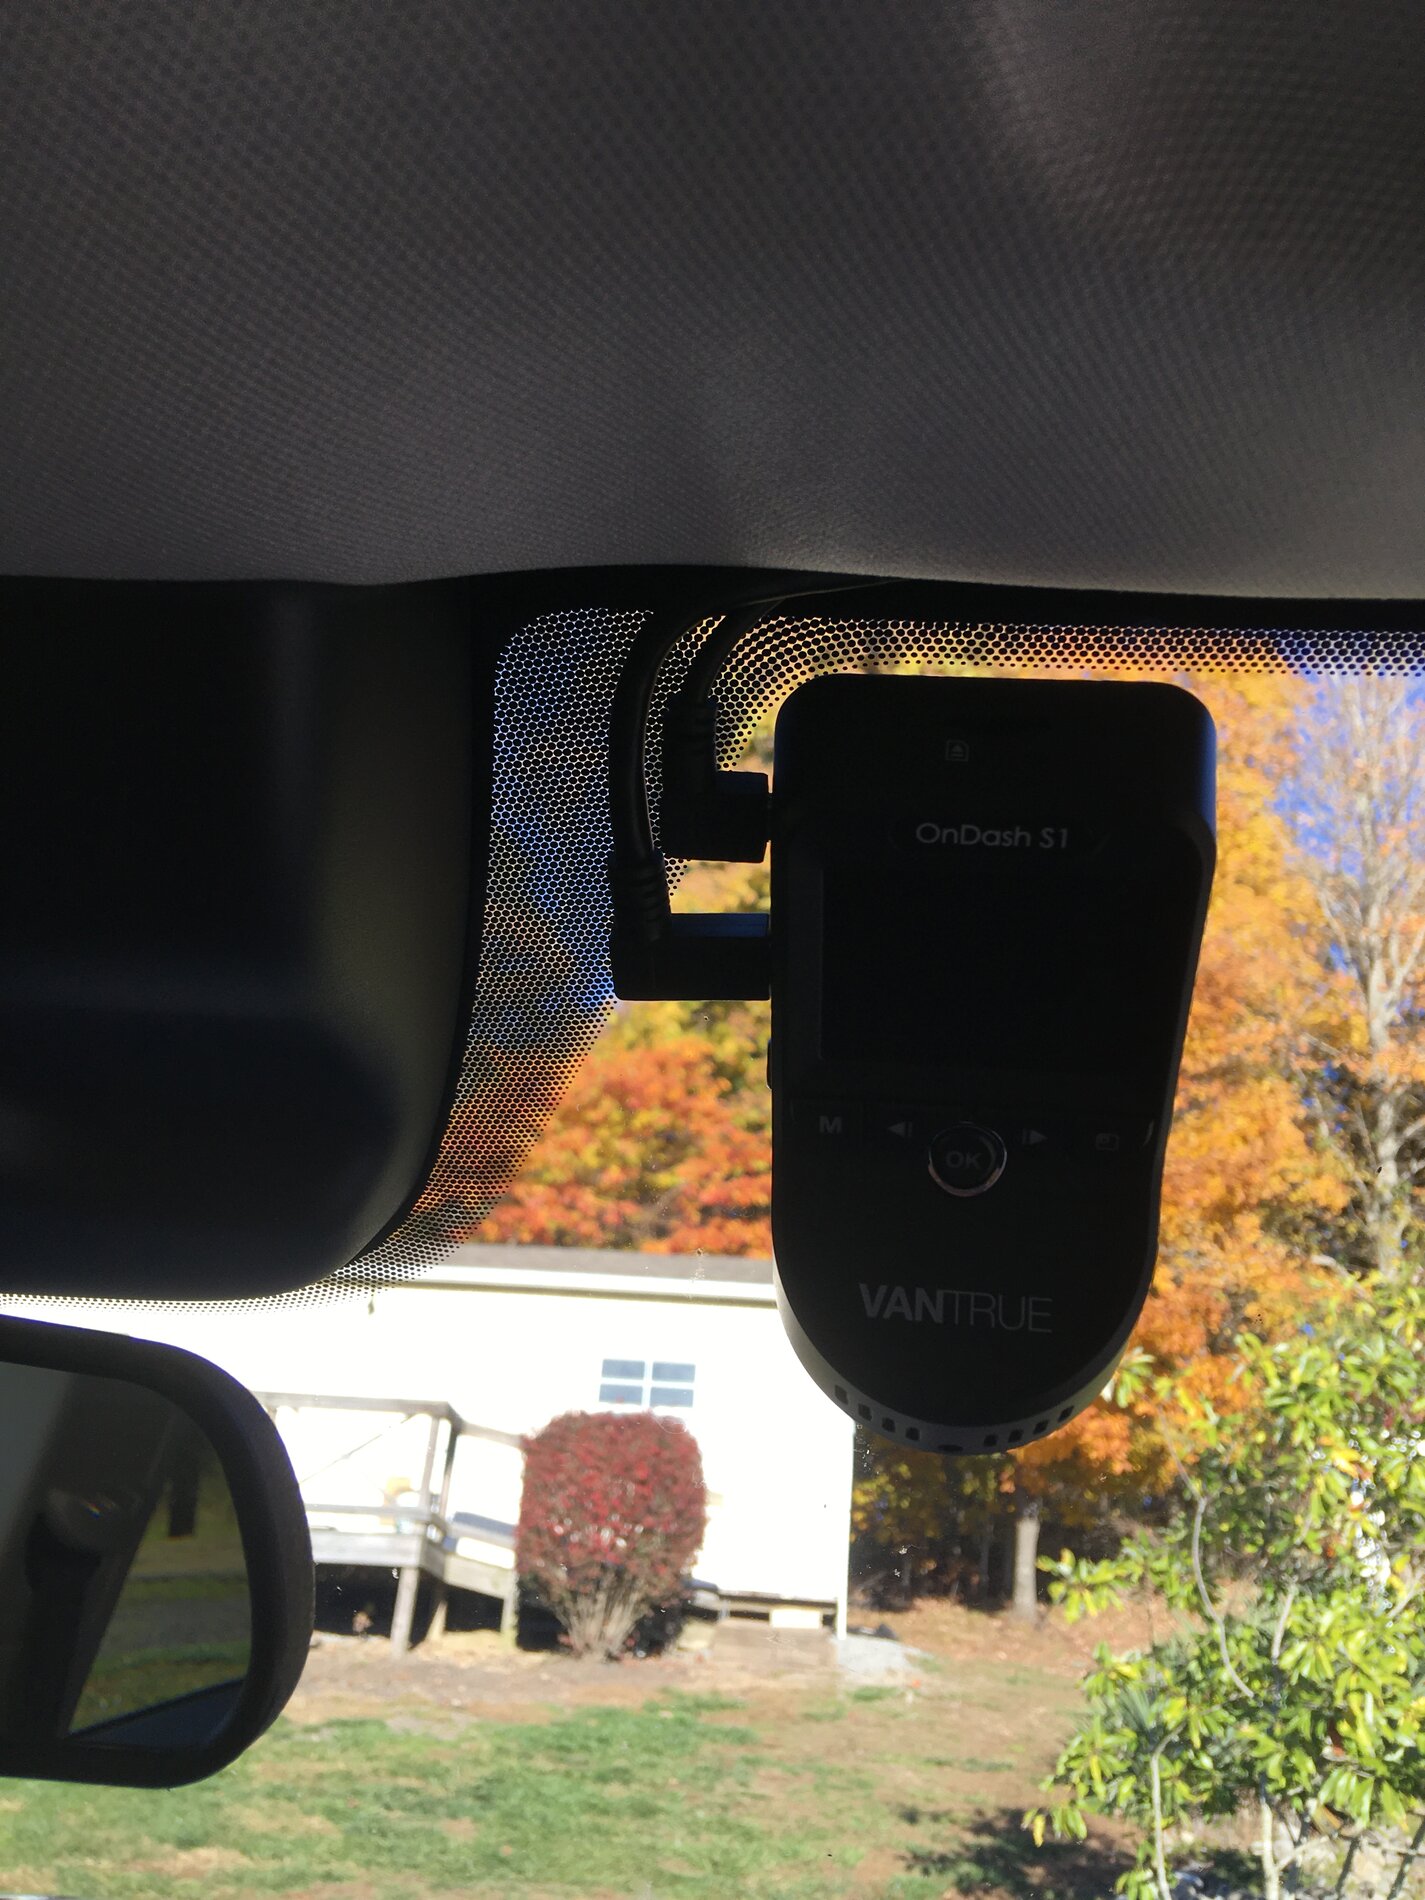 Ring Car Camera (dash cam security camera) installed  MaverickTruckClub -  2022+ Ford Maverick Pickup Forum, News, Owners, Discussions